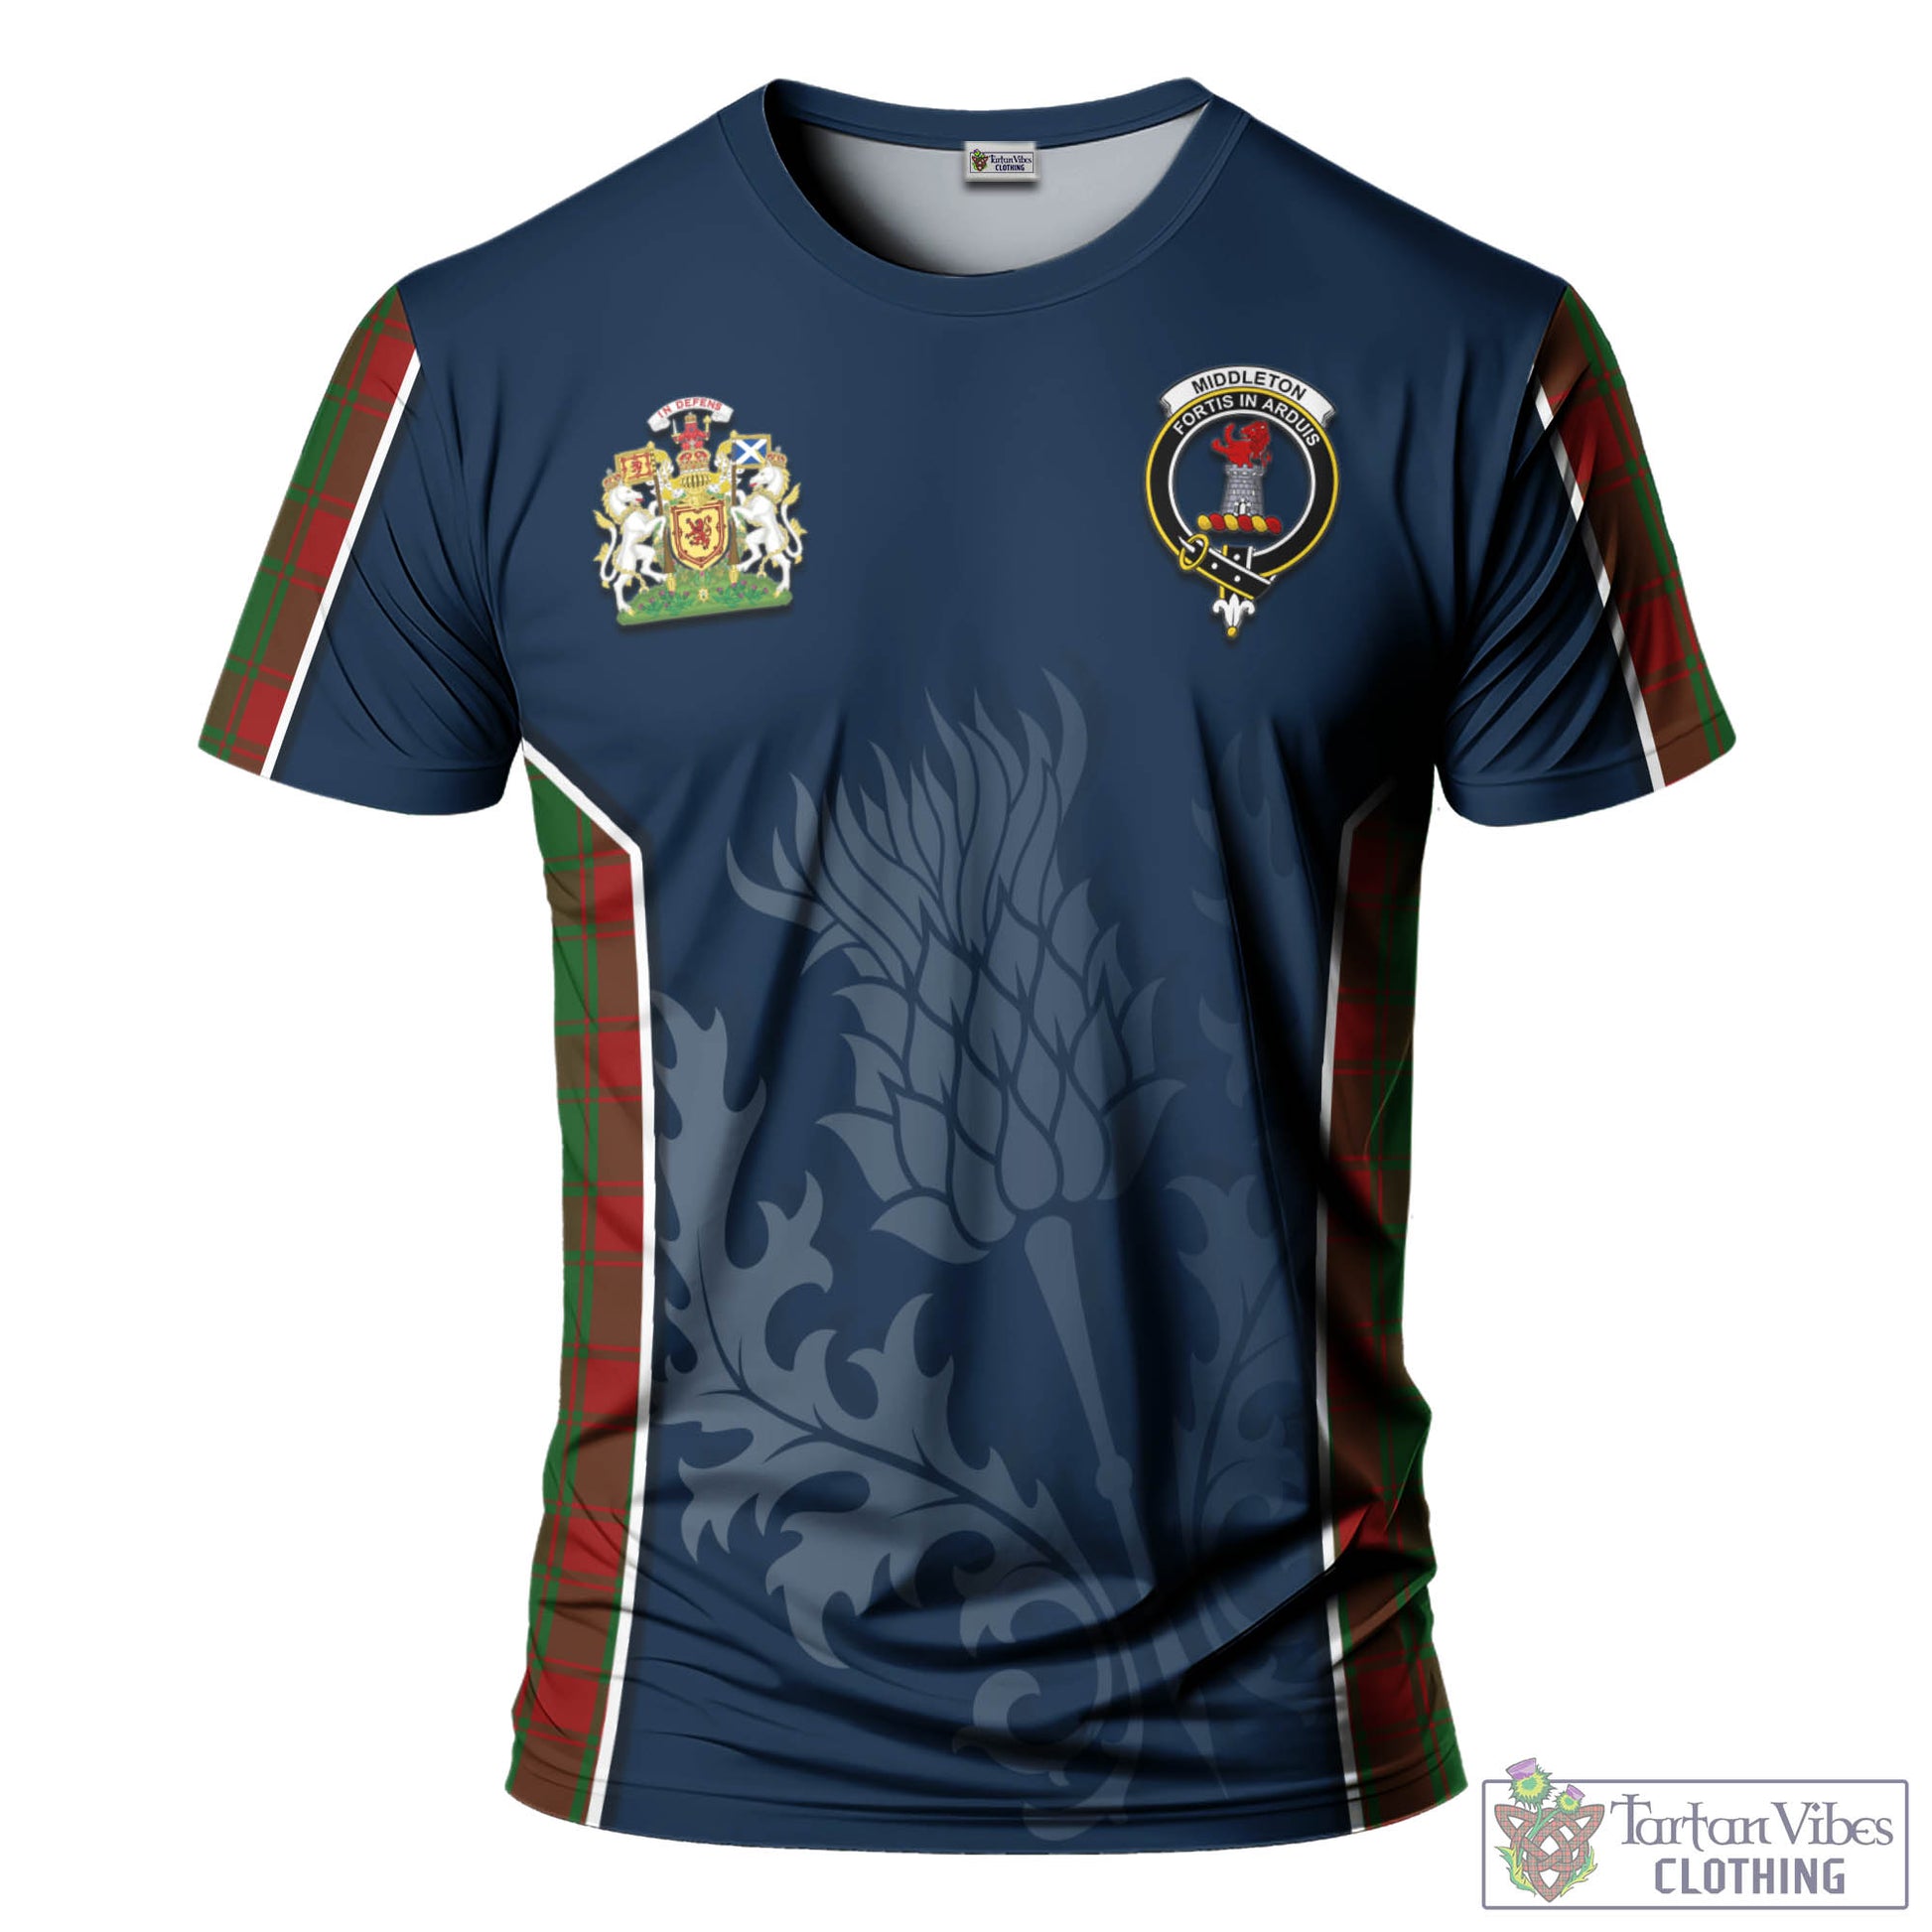 Tartan Vibes Clothing Middleton Tartan T-Shirt with Family Crest and Scottish Thistle Vibes Sport Style